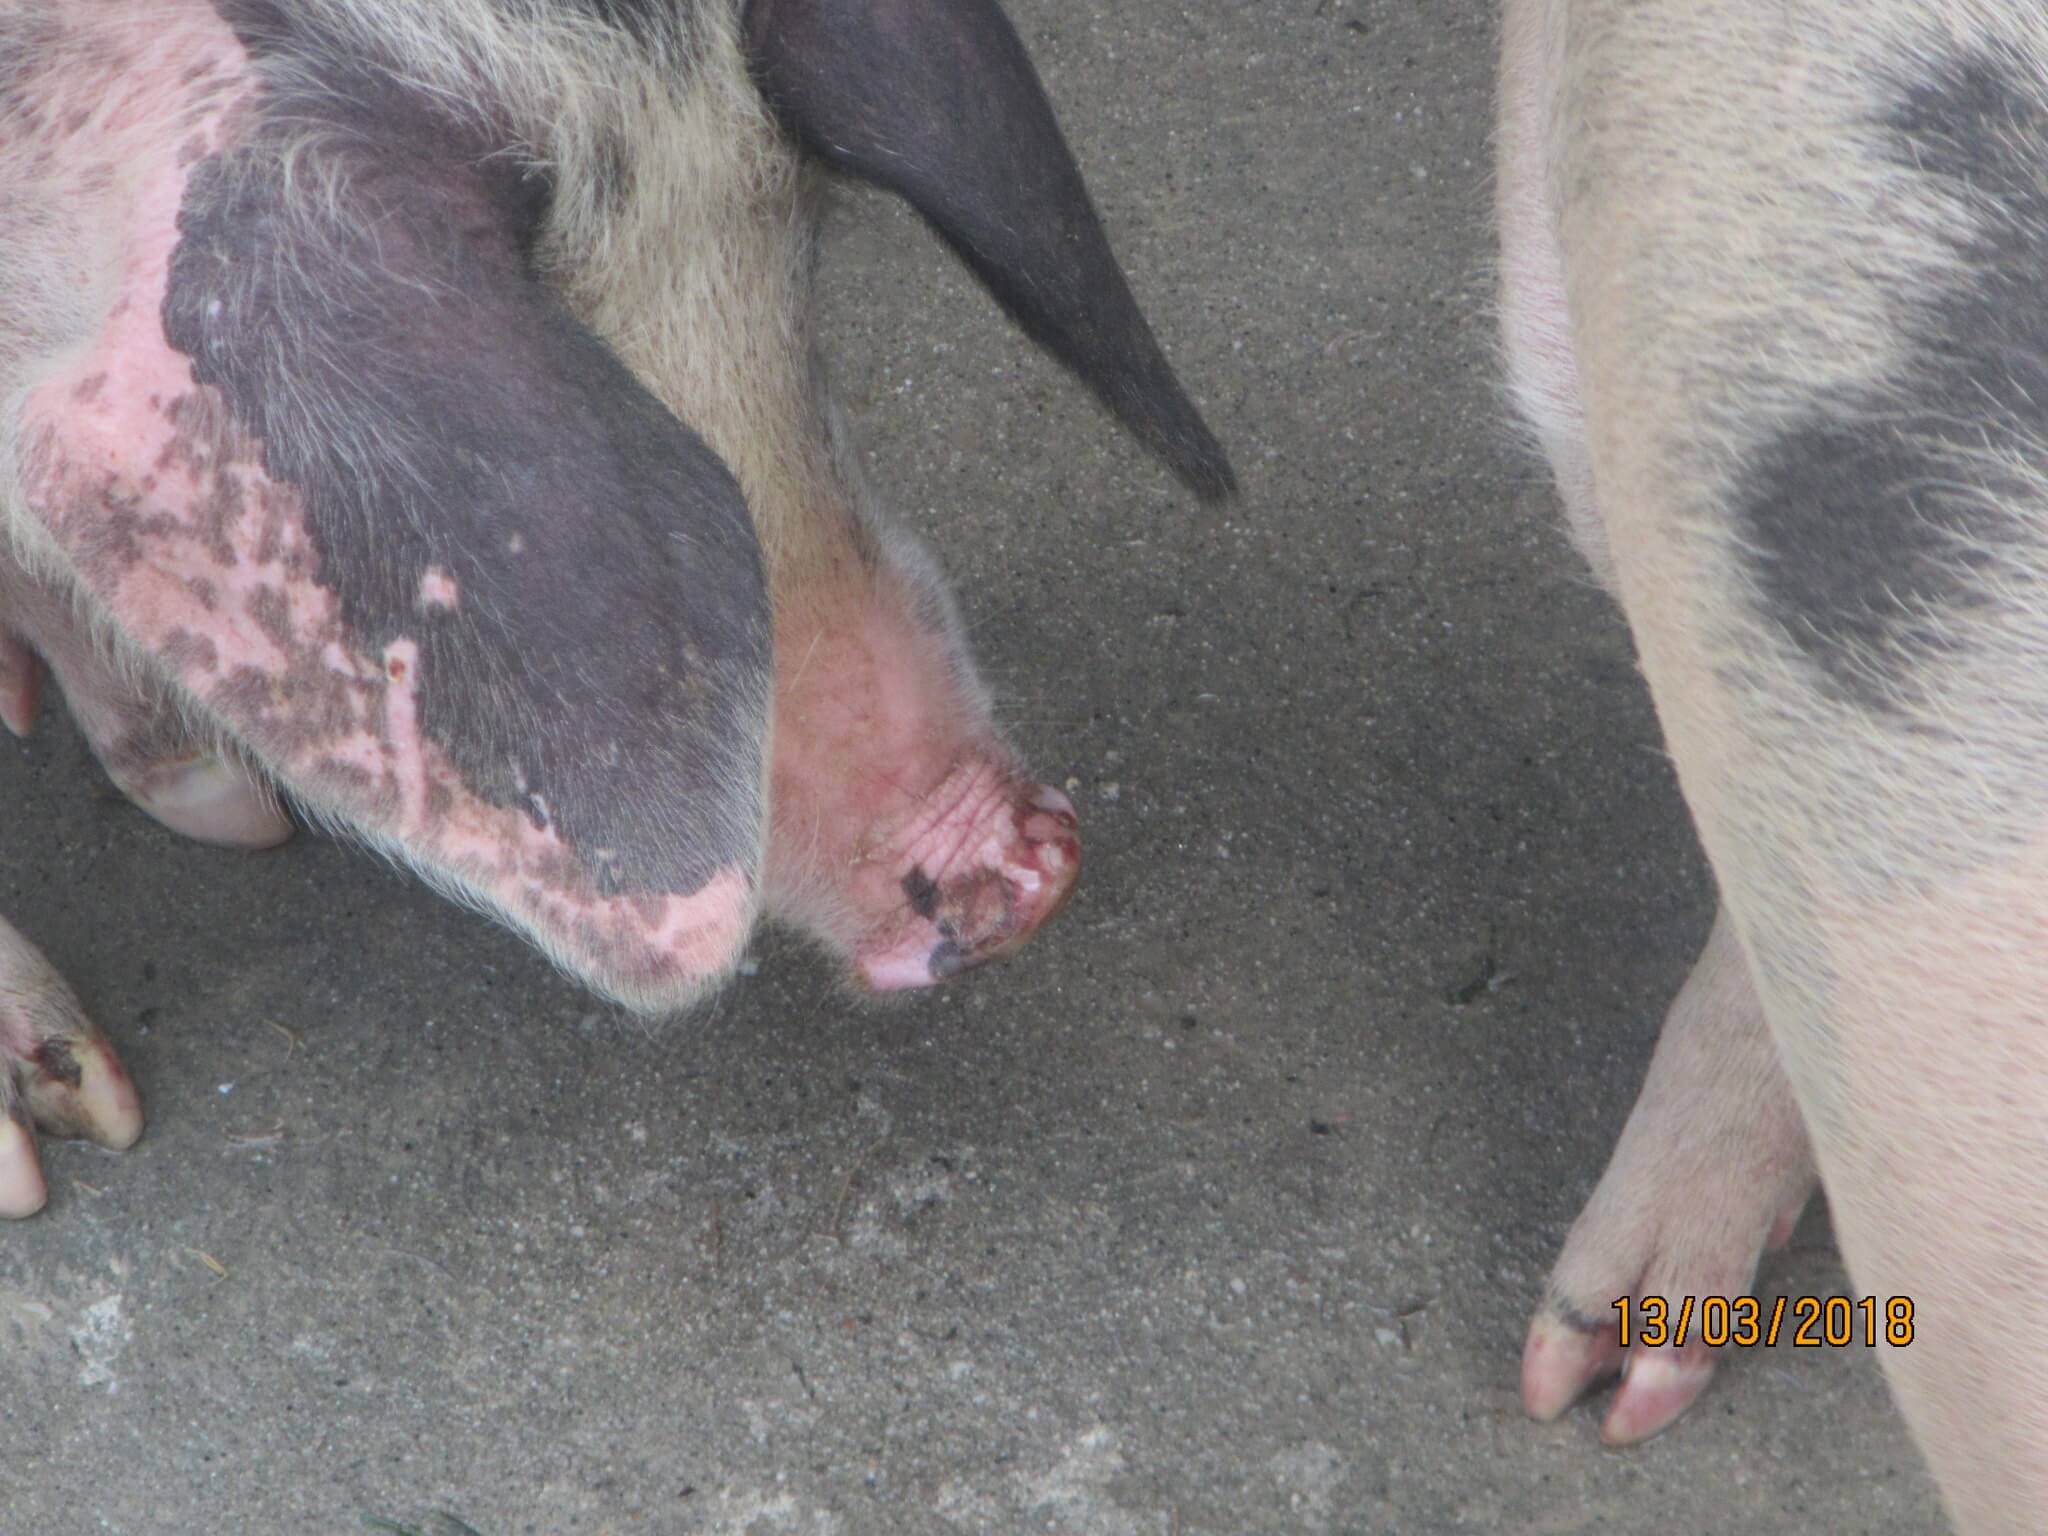 Foot-and-mouth-disease blisters on a pig